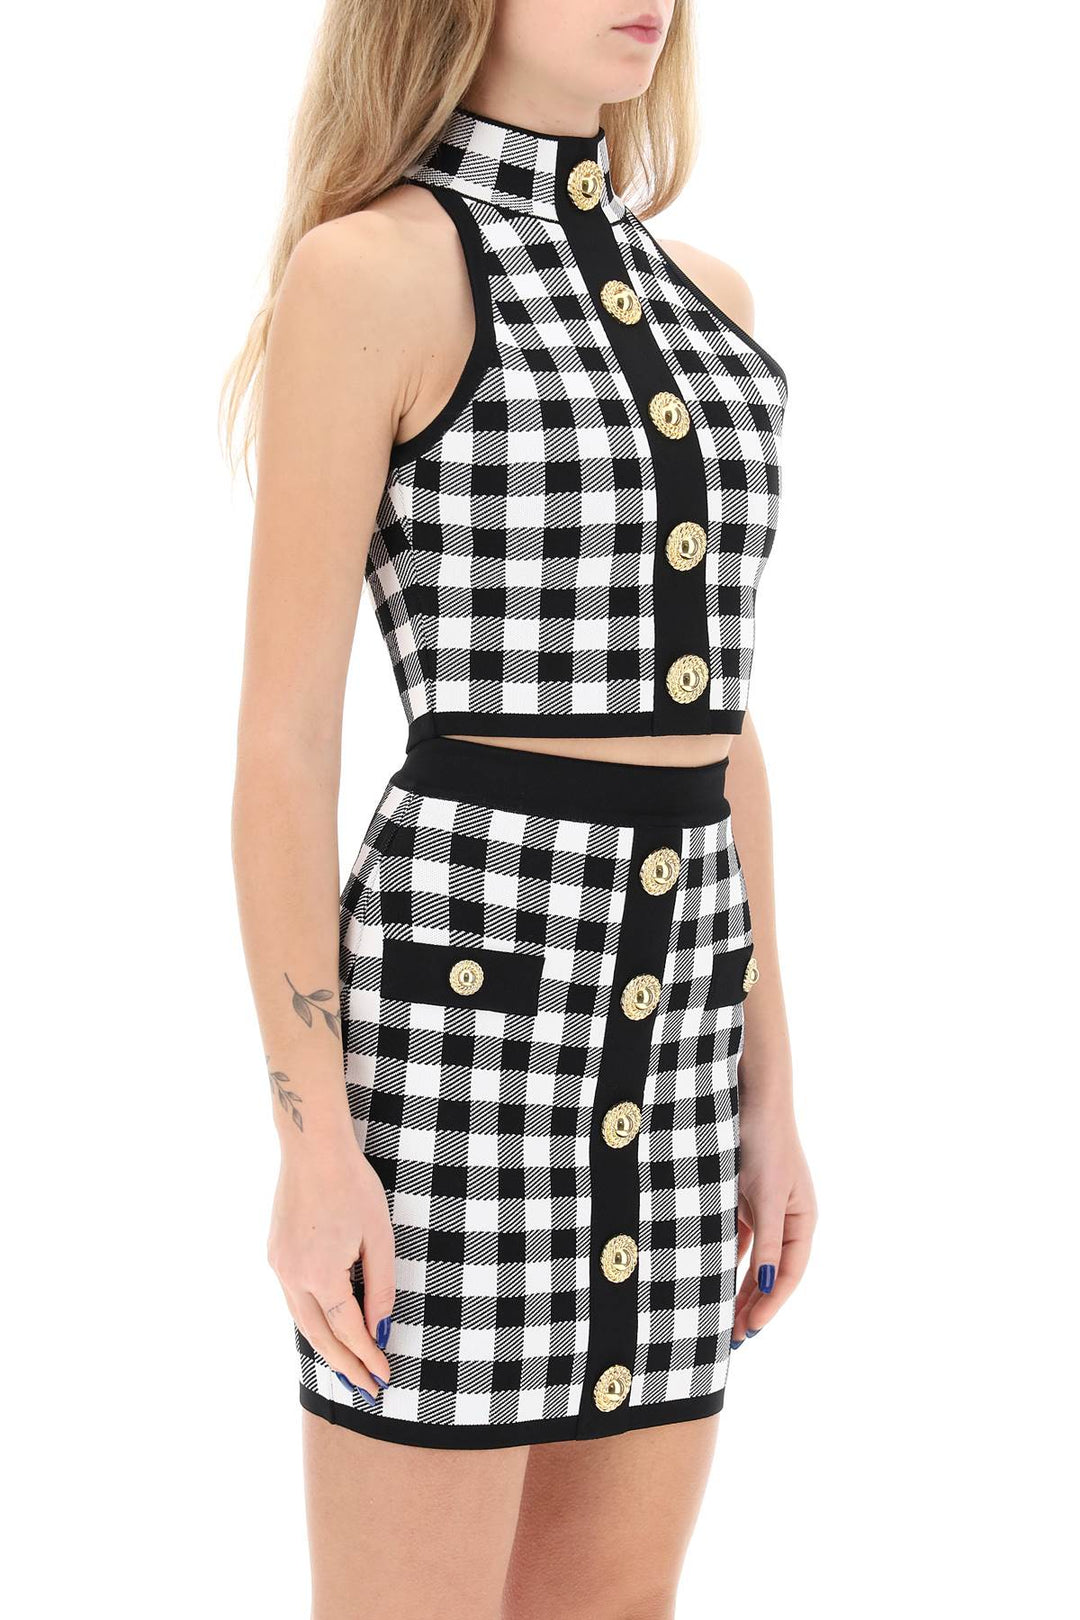 Balmain Gingham Knit Cropped Top With Embossed Buttons   White